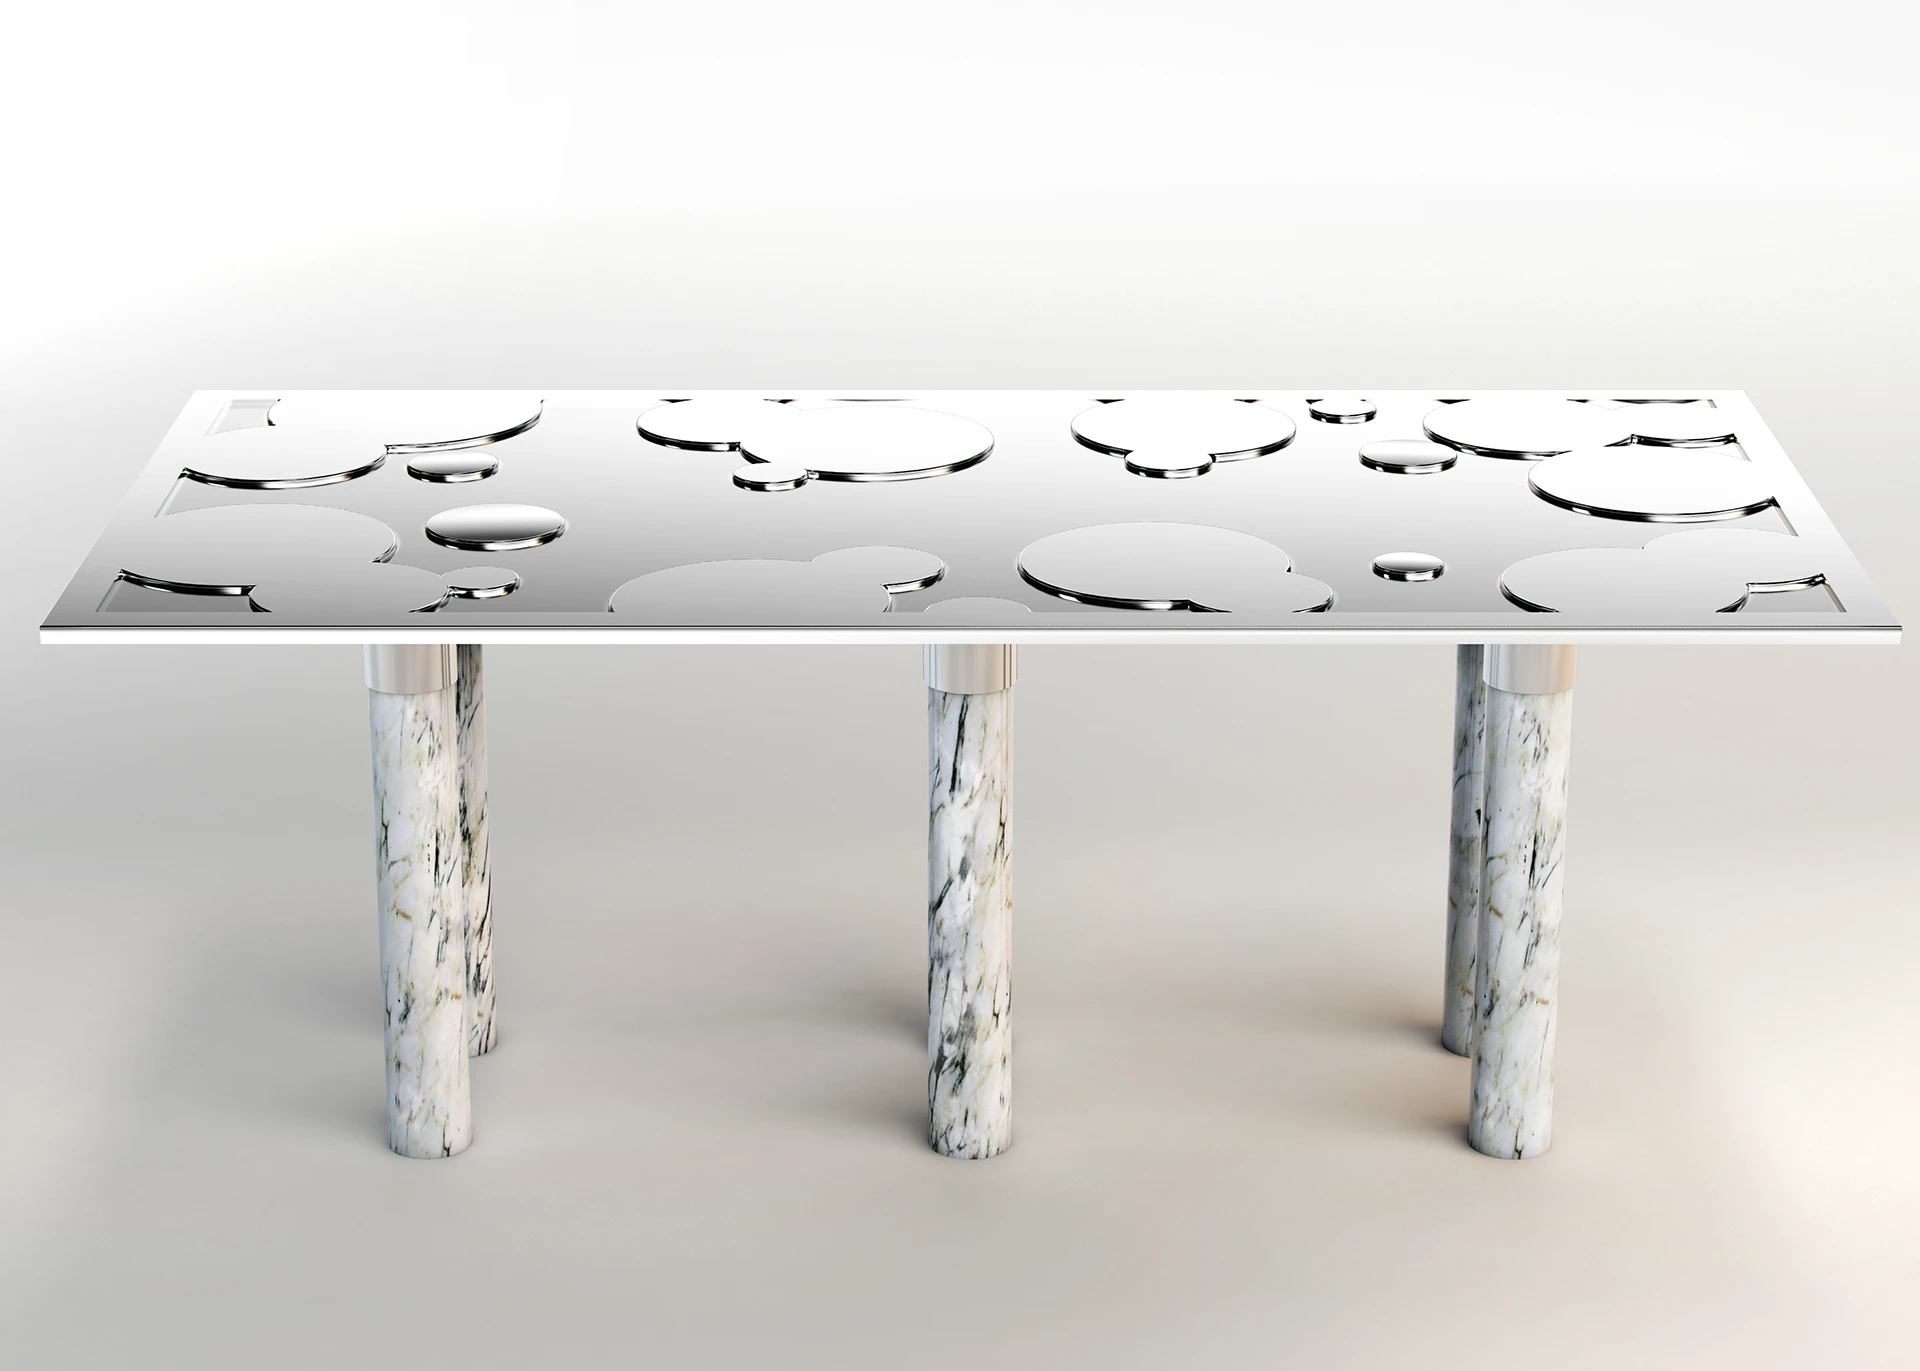 conceptual rendering of Siver table with chrome design